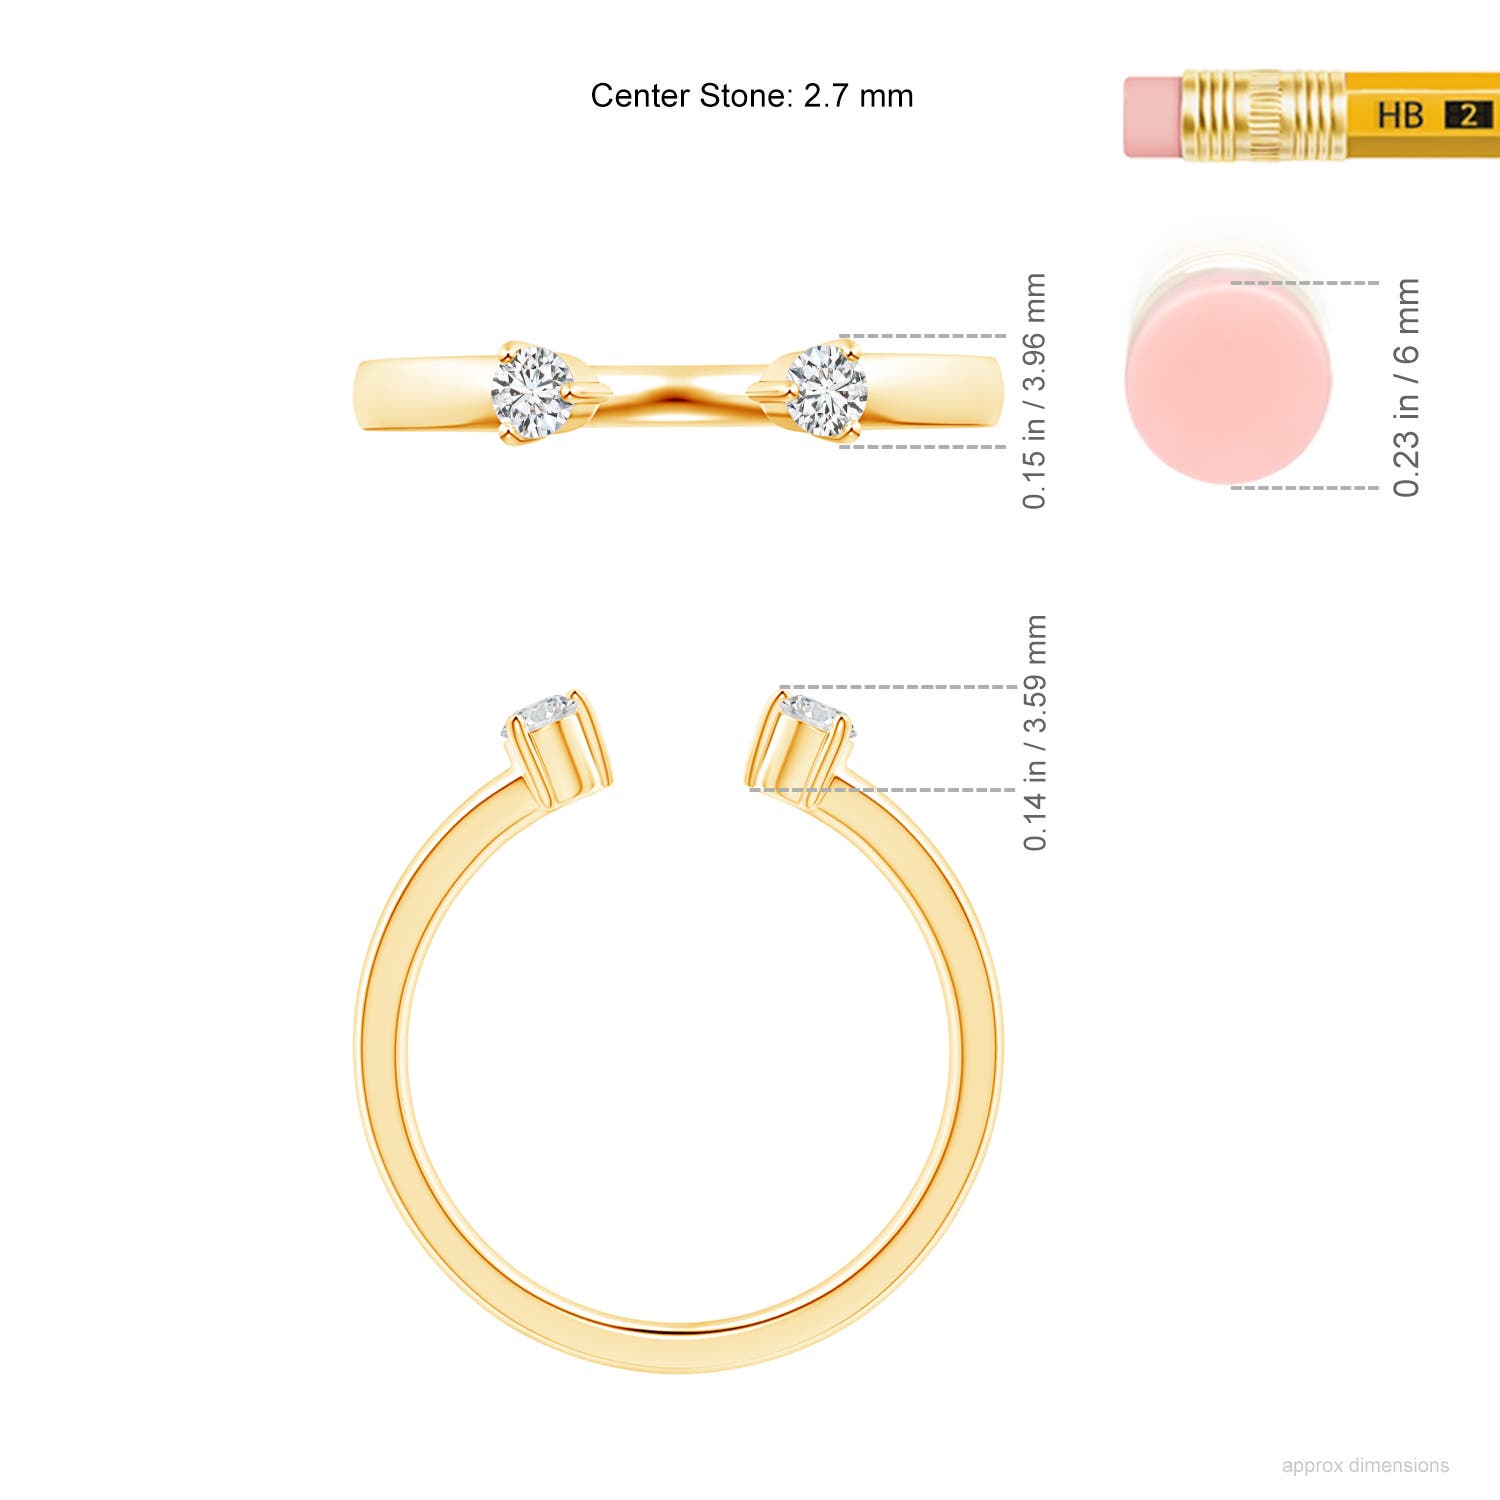 H, SI2 / 0.16 CT / 14 KT Yellow Gold